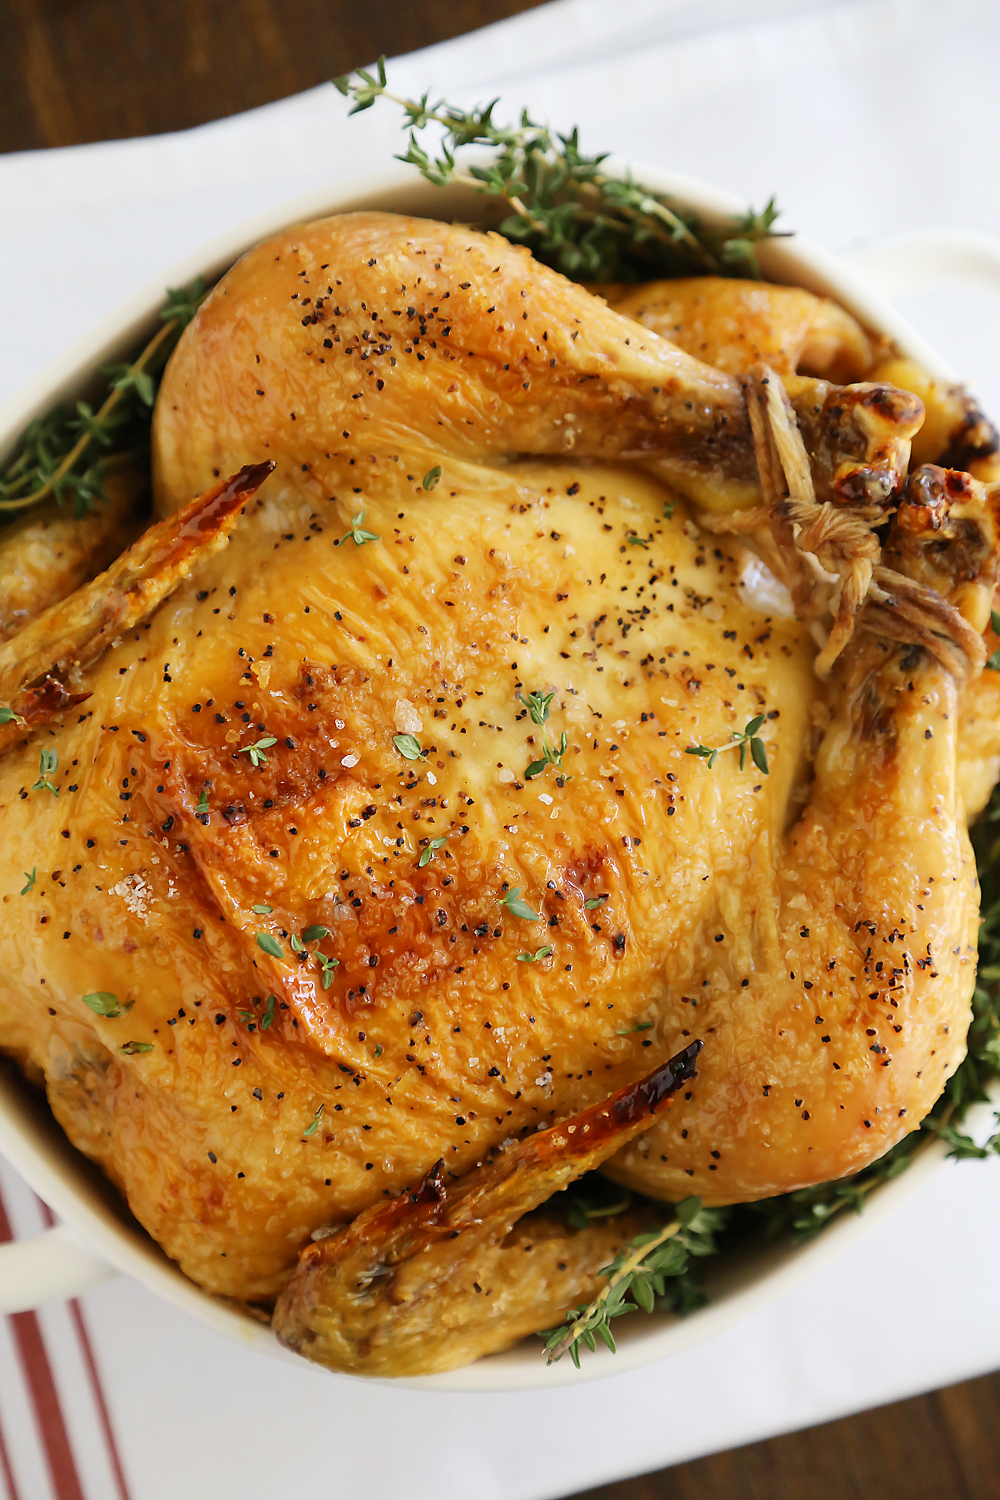 Thomas Keller [3-Ingredient] Roasted Chicken – So easy, crisp and juicy! No butter or oil. You’ll be amazed at the ingredients! Thecomfortofcooking.com